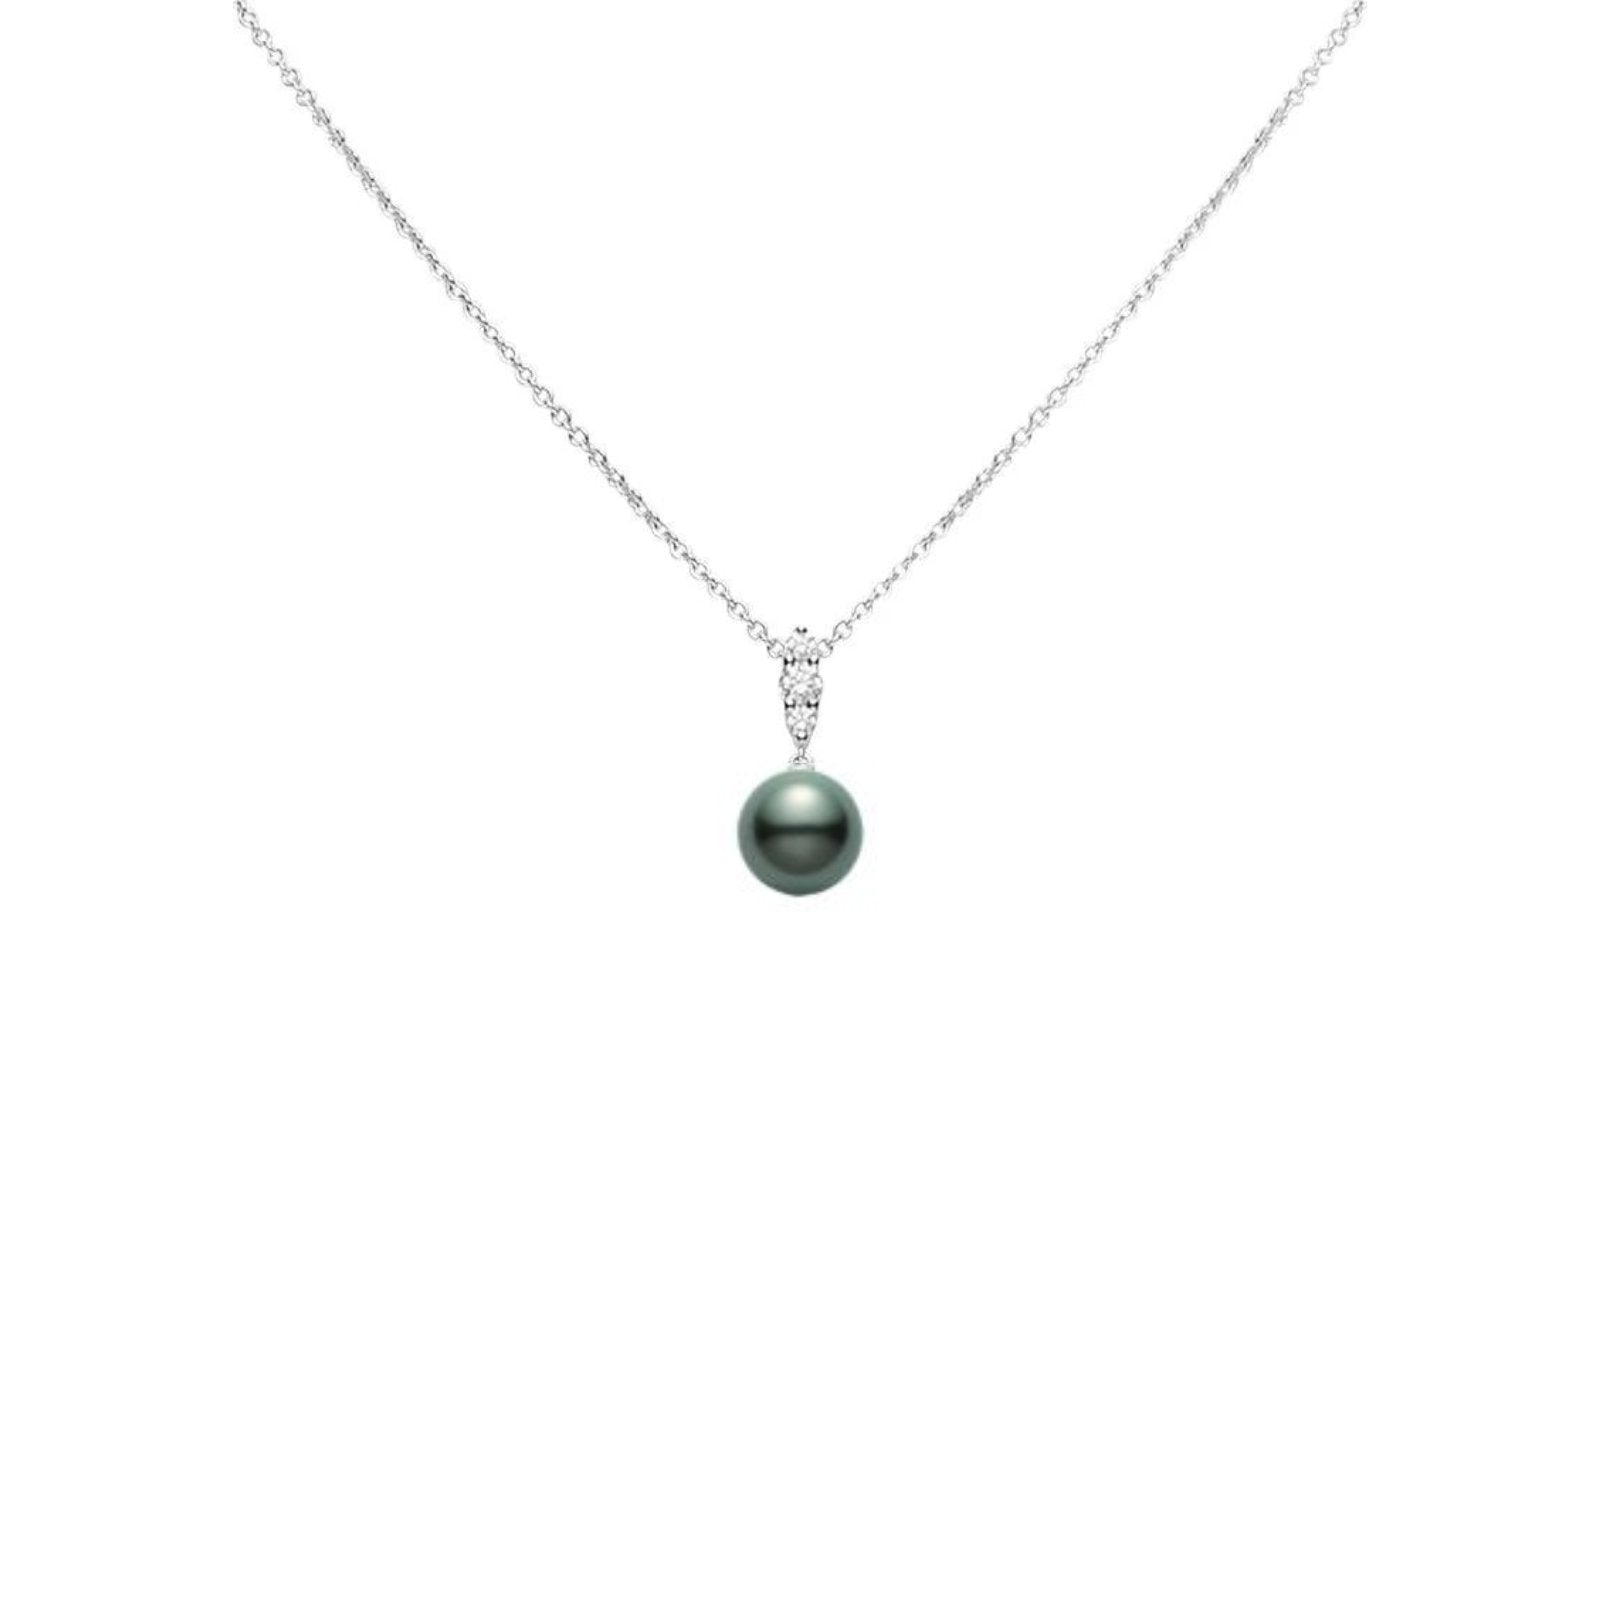 Mikimoto Black South Sea Cultured Pearl Morning Dew Necklace